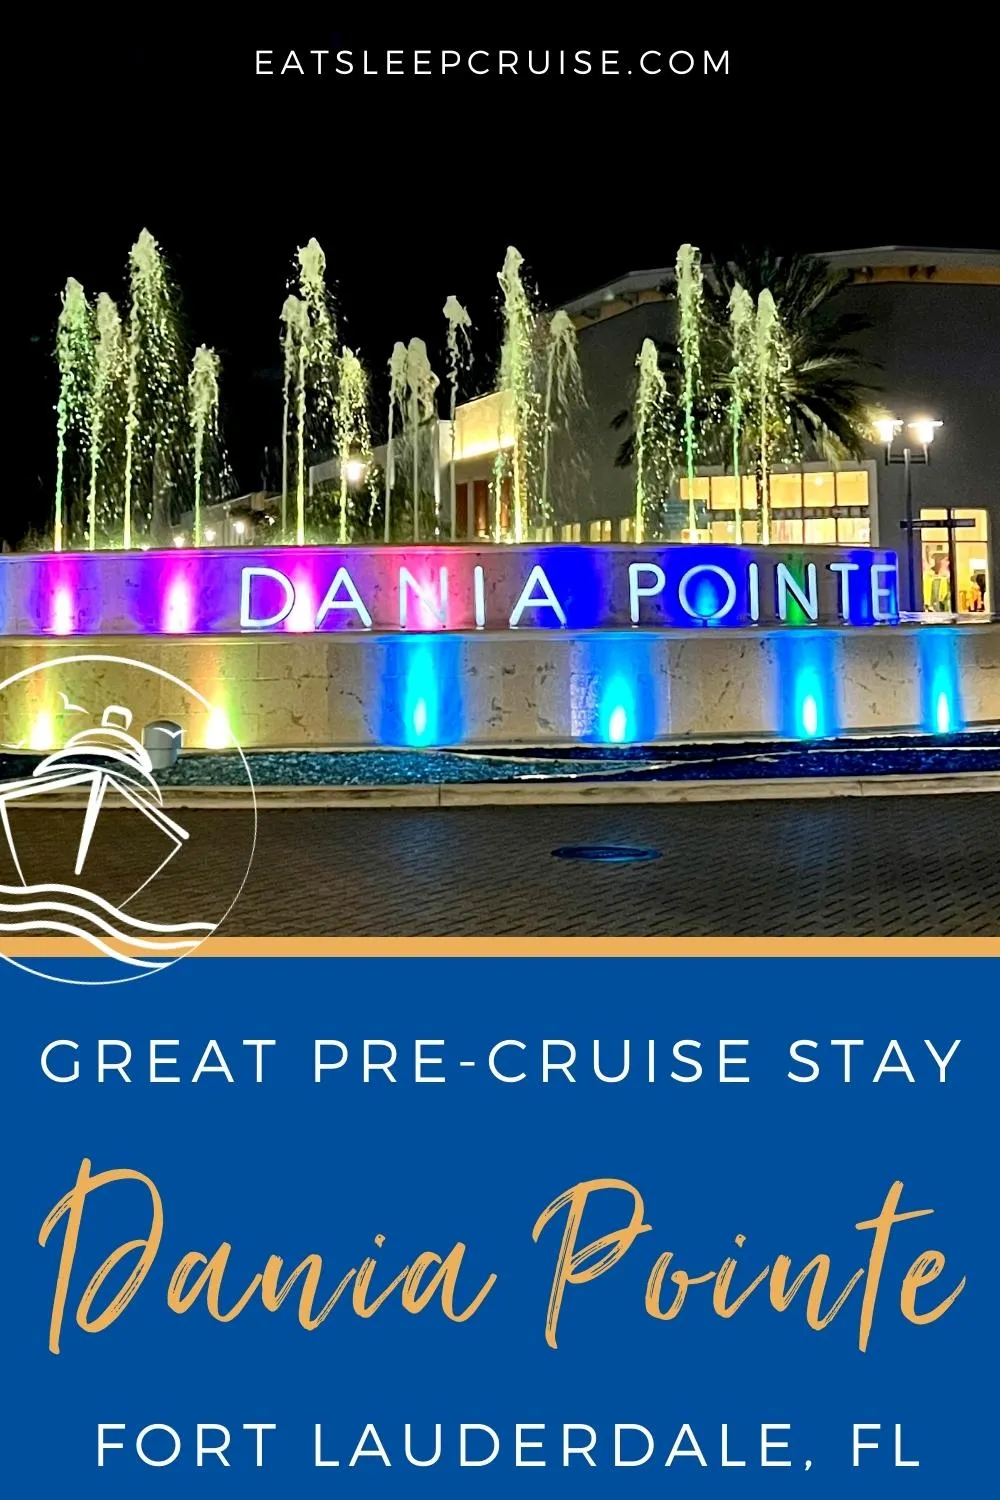 Why Your Next Pre-Cruise Stay Should Be At Dania Pointe